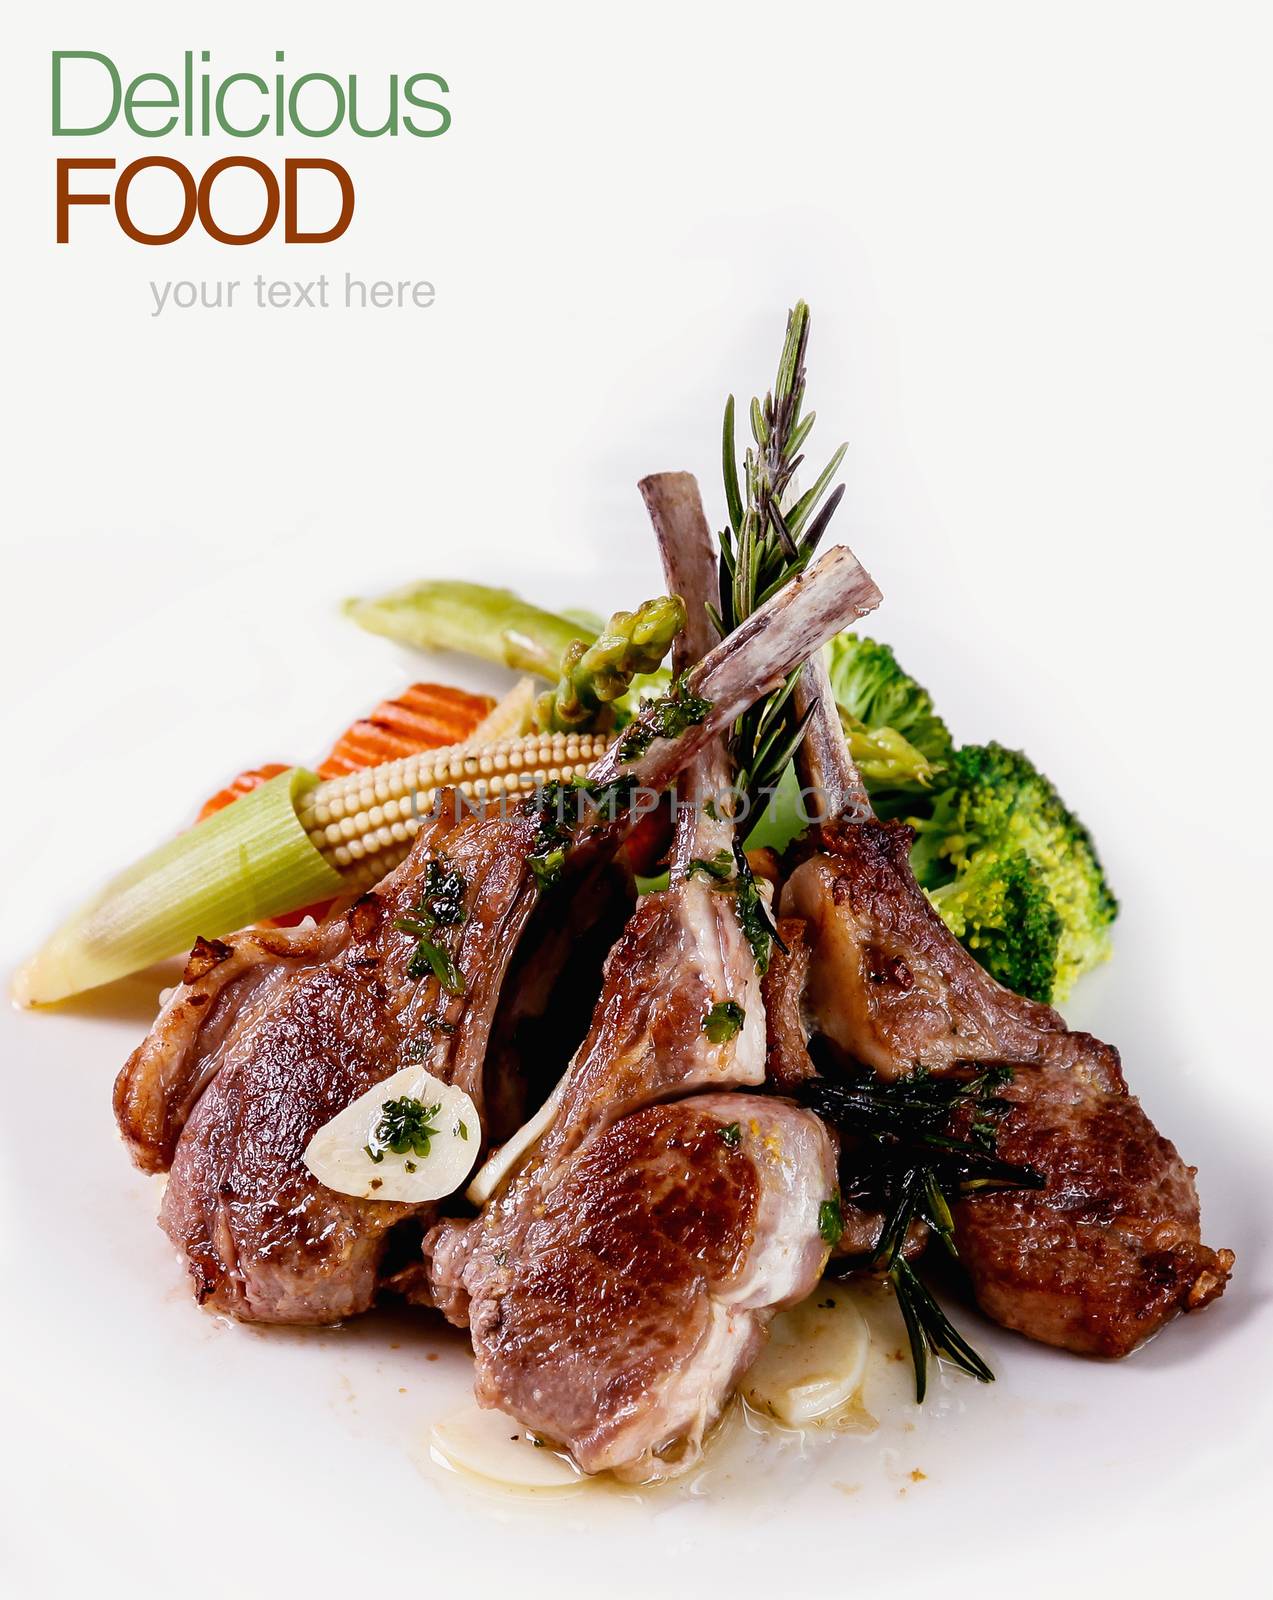 Roasted Lamb Chops with Vegetables and Basil. by kerdkanno